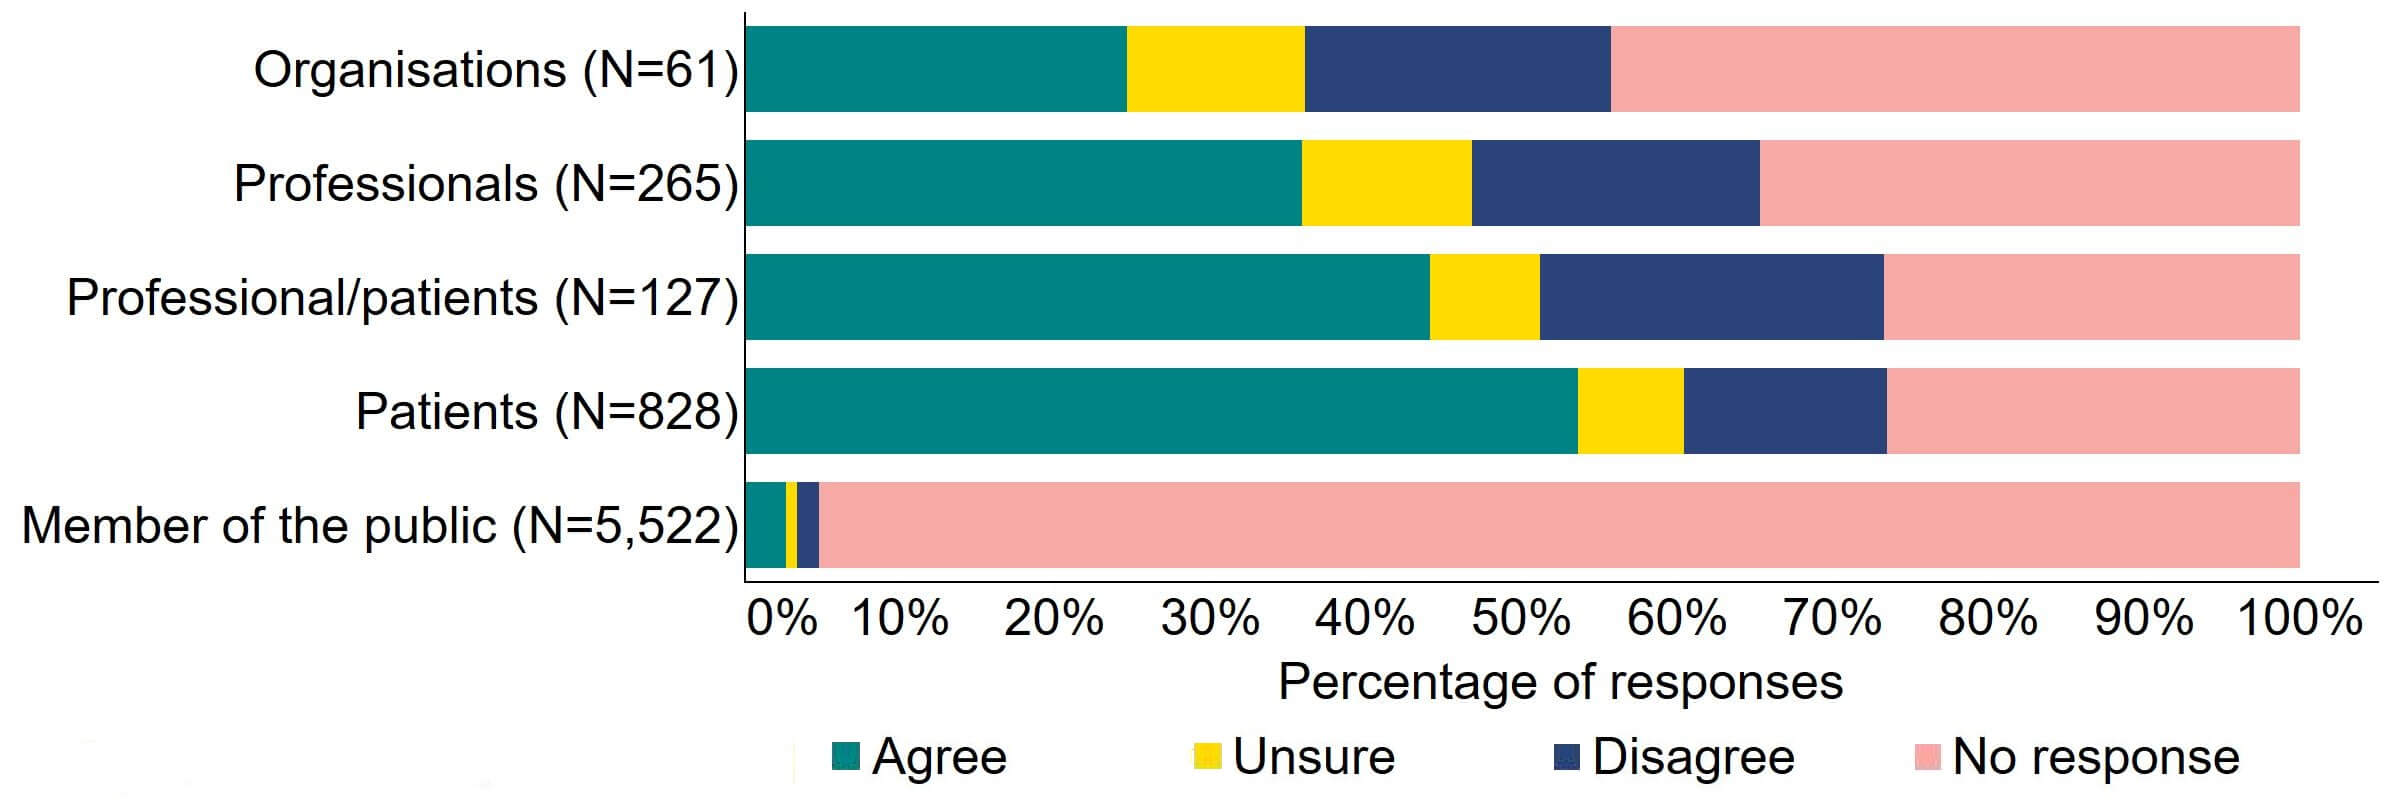 Figure 11 is a stacked bar chart showing the proportion of respondents in each response group who agreed, disagreed, were unsure, or who did not provide a response to the proposal. The underlying data can be downloaded as an Excel worksheet at the top of the page.